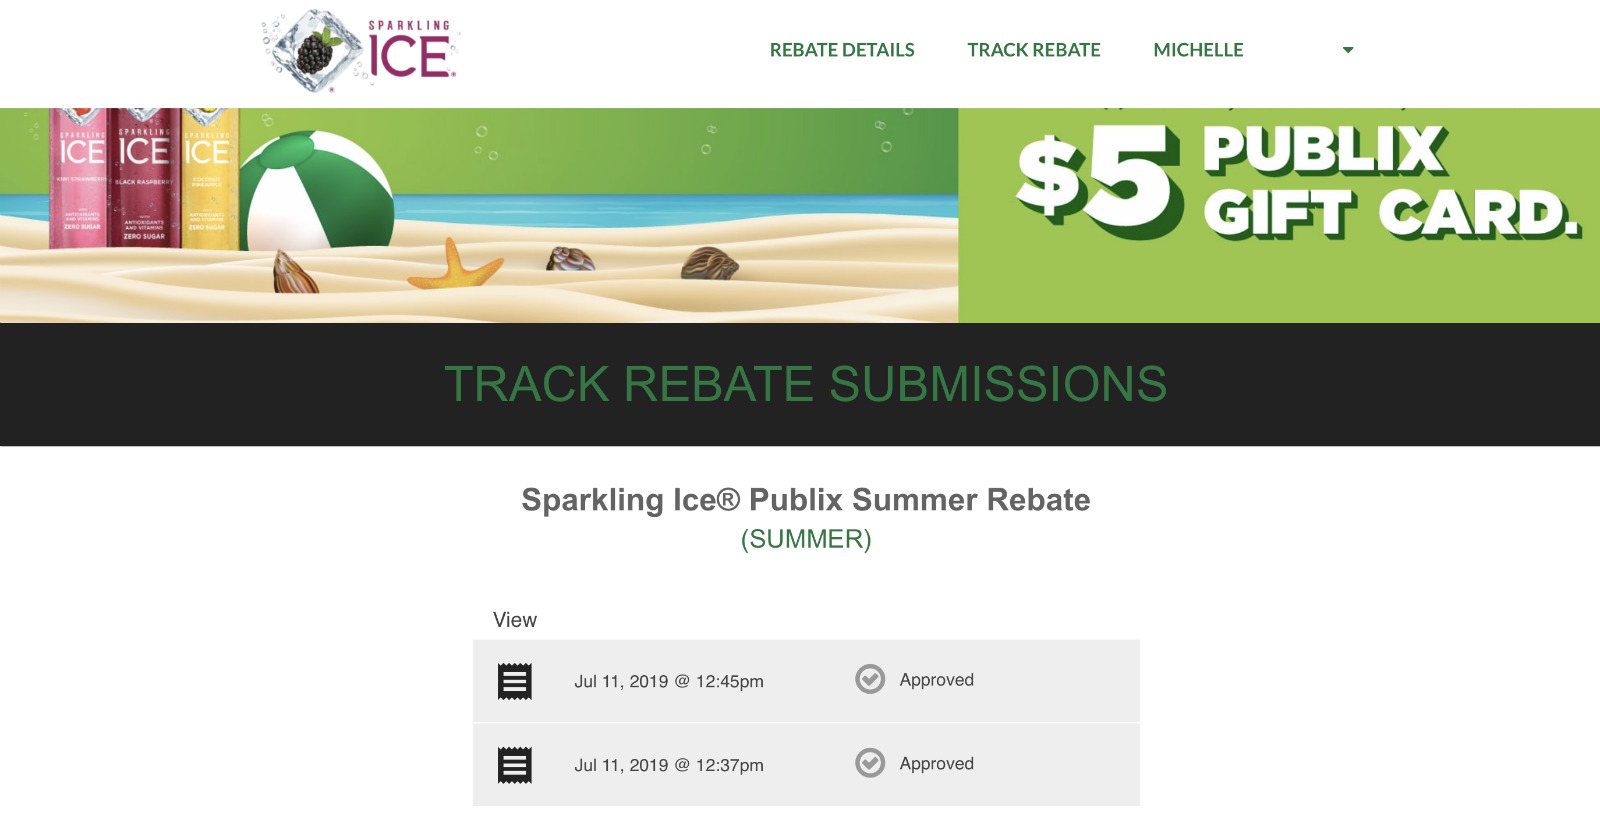 Still Time To Earn A Publix Gift Card With Your Sparkling Ice Purchase! on I Heart Publix